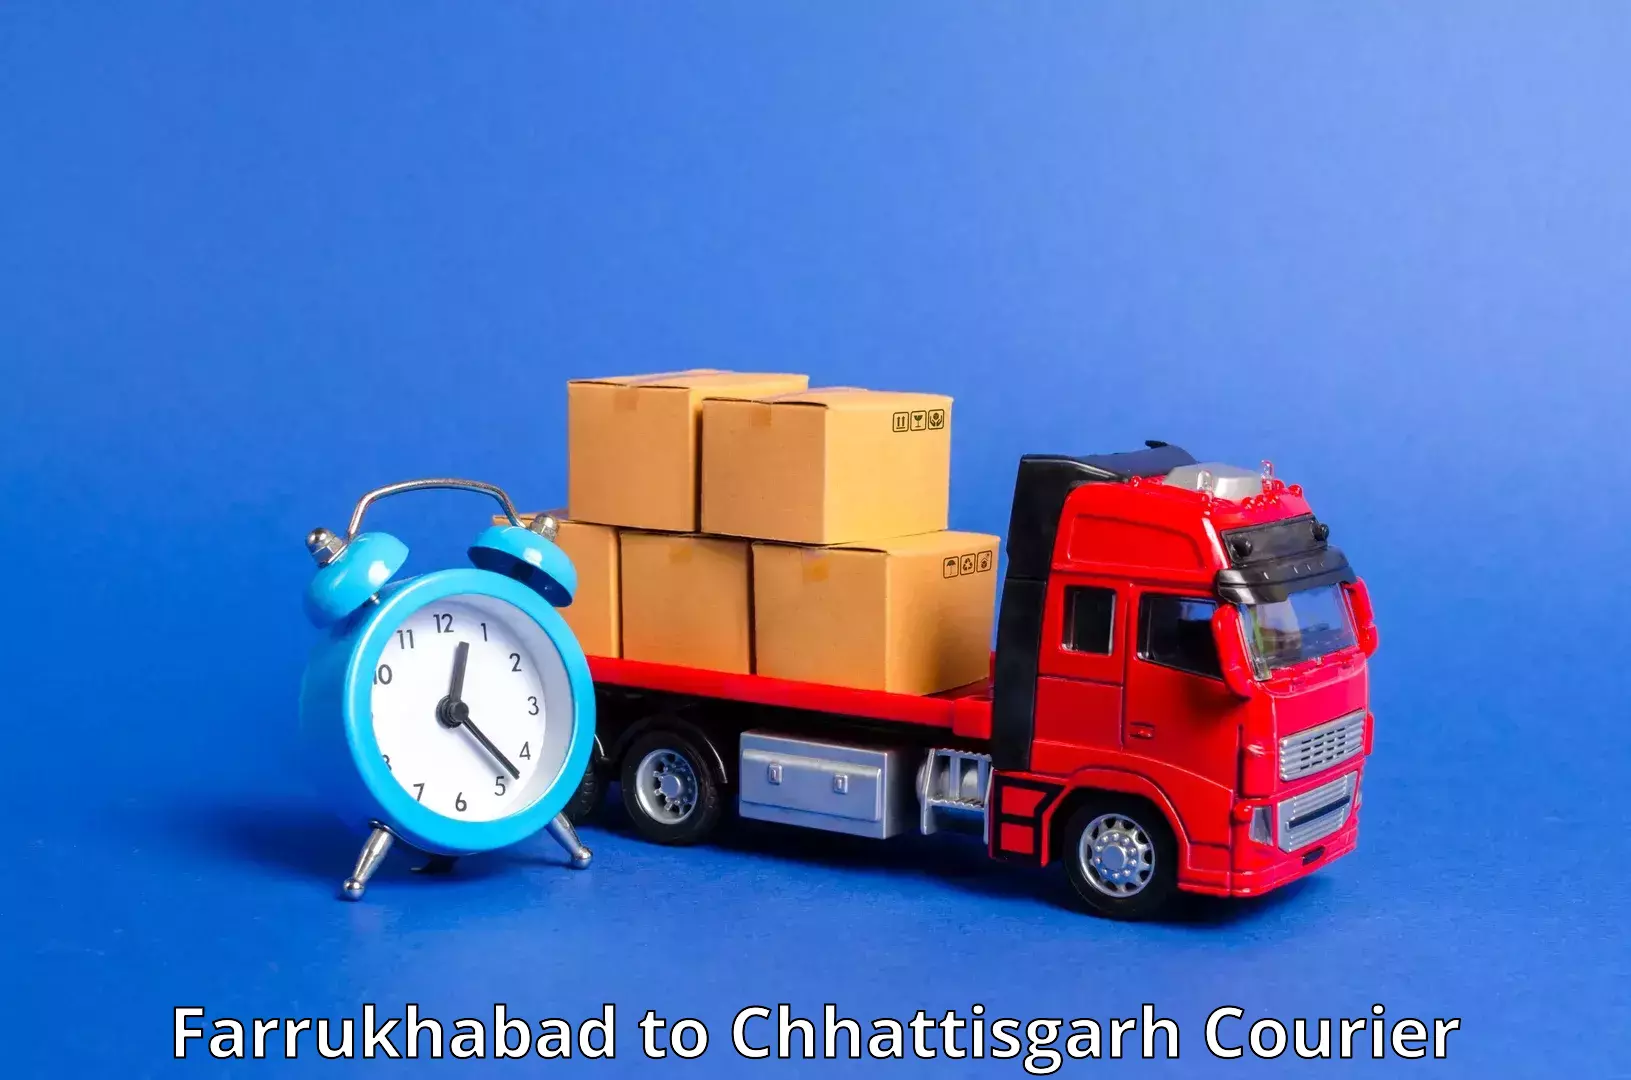 User-friendly delivery service Farrukhabad to Berla